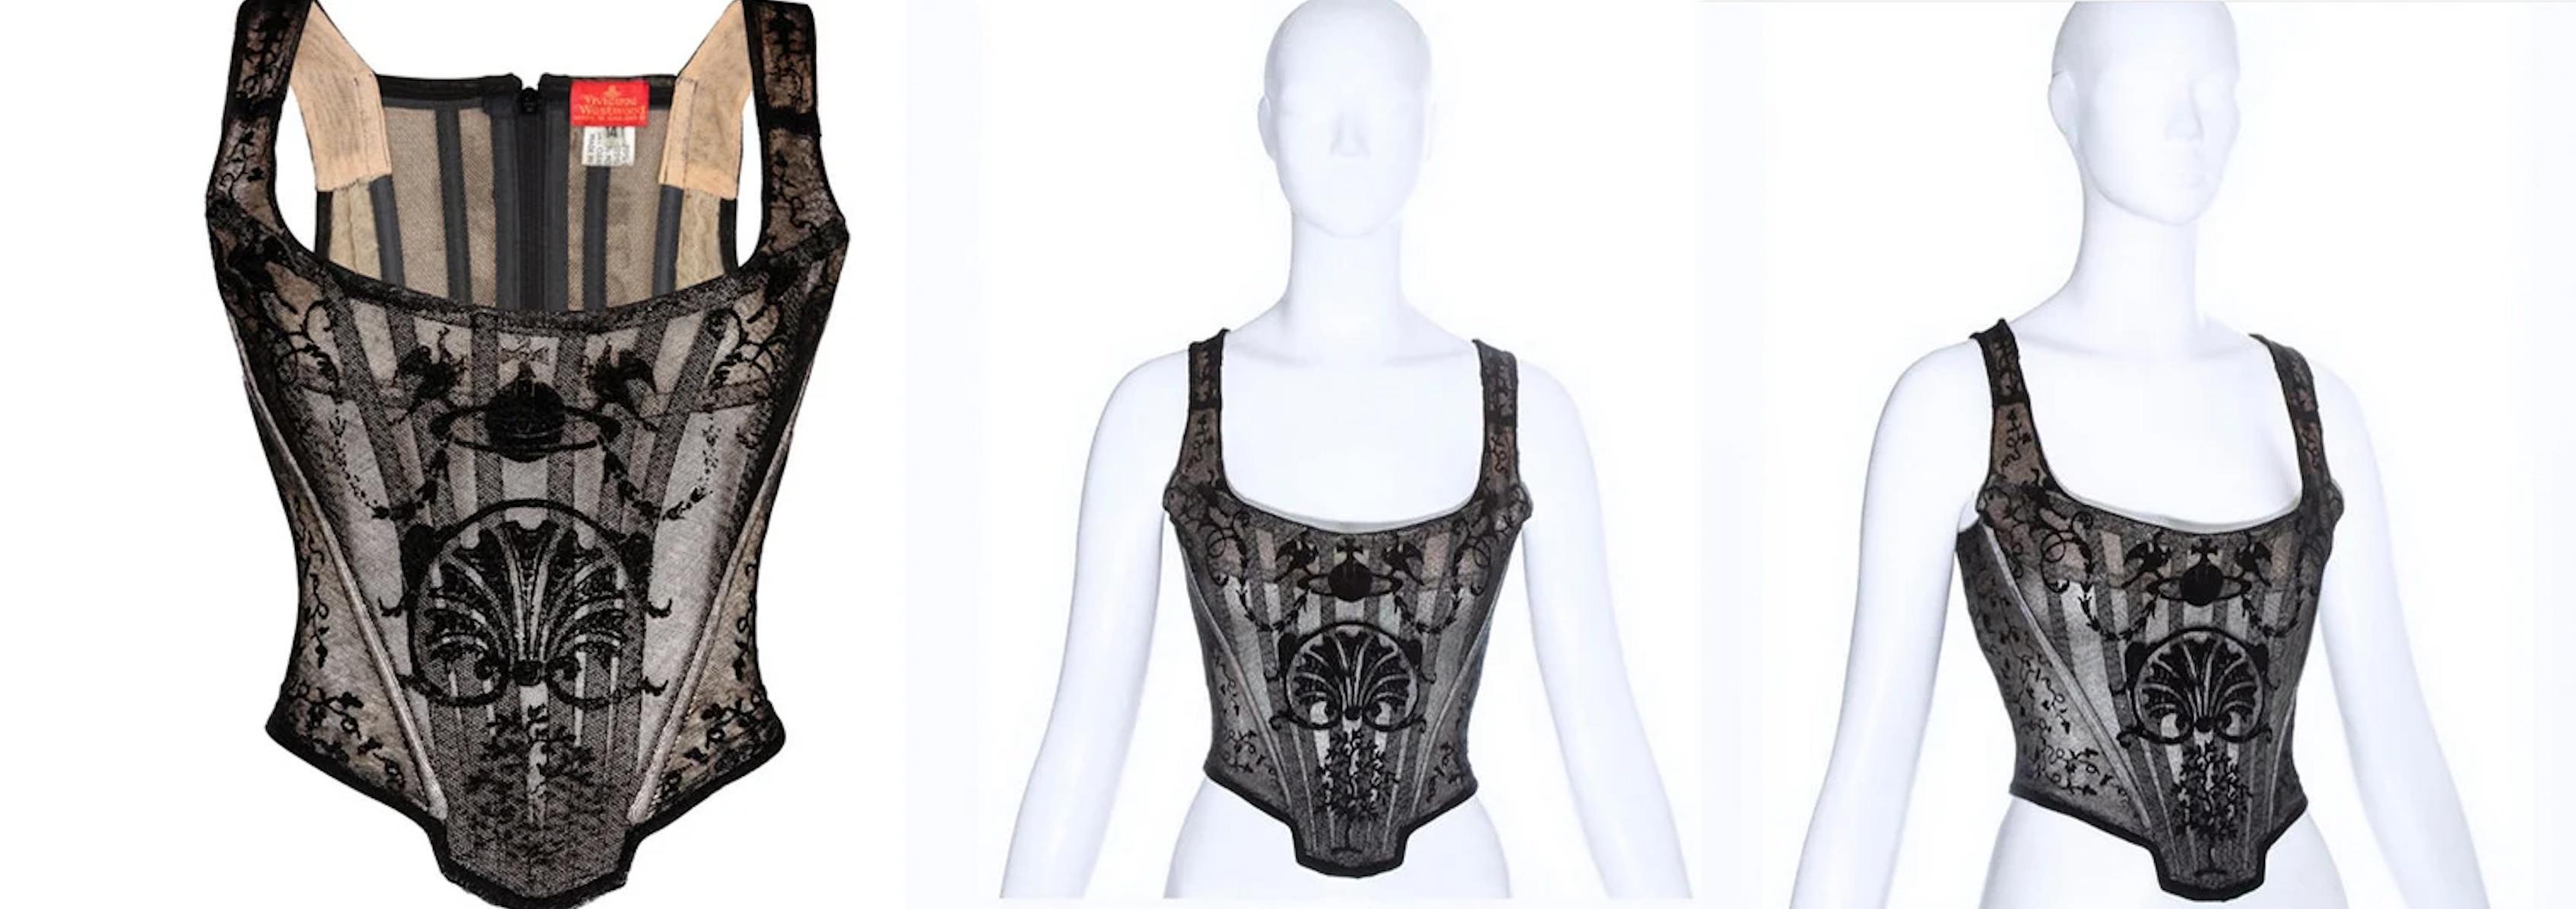 
HOLY GRAIL
Extremely rare original Vivienne Westwood corset. Spring Summer Collection 1992. Worn on the runway as well as seen on Susie Cave.
Black lace mesh corset with signature André-Charles Boulle pattern. Internal boning.

Iconic.
Vivienne